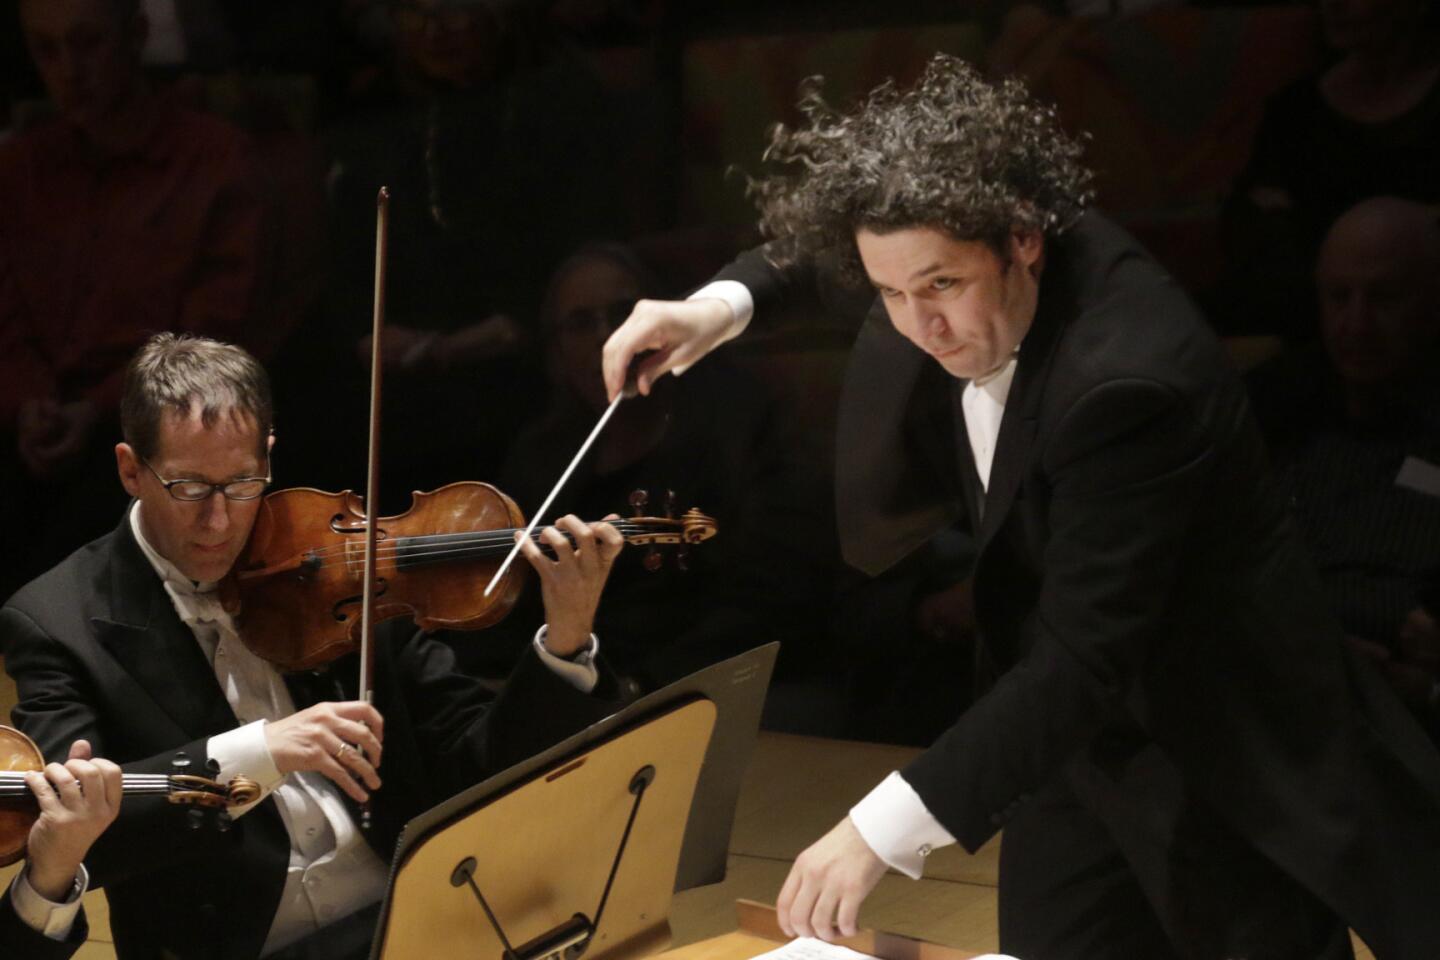 Arts and culture in pictures by The Times | Gustavo Dudamel